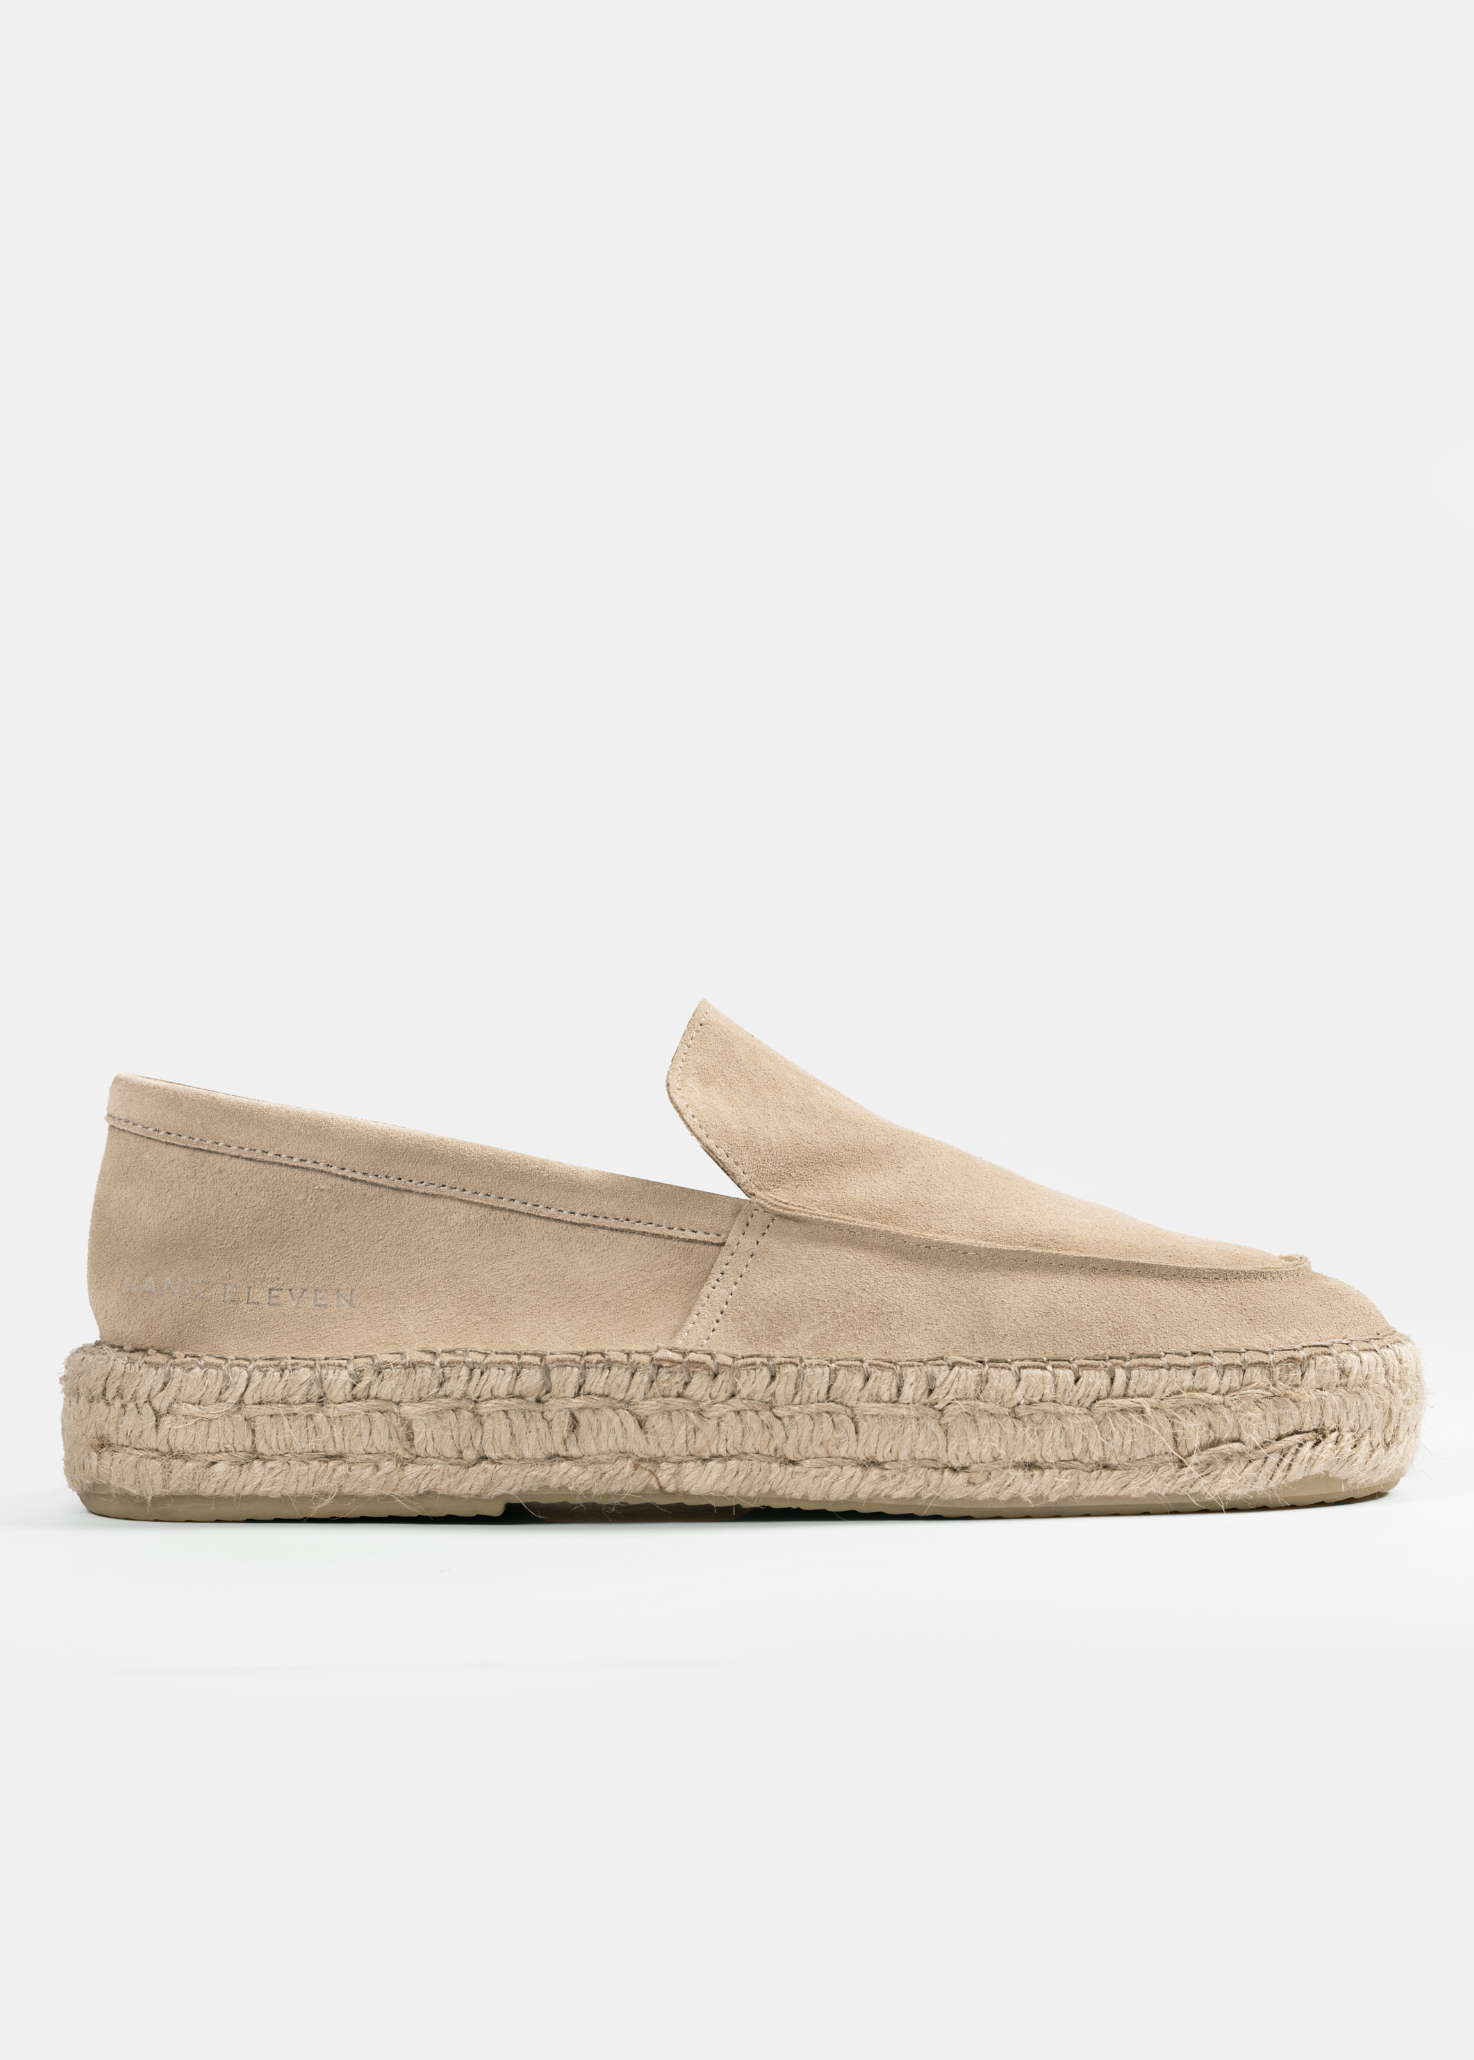 The Beach Loafer - Beige